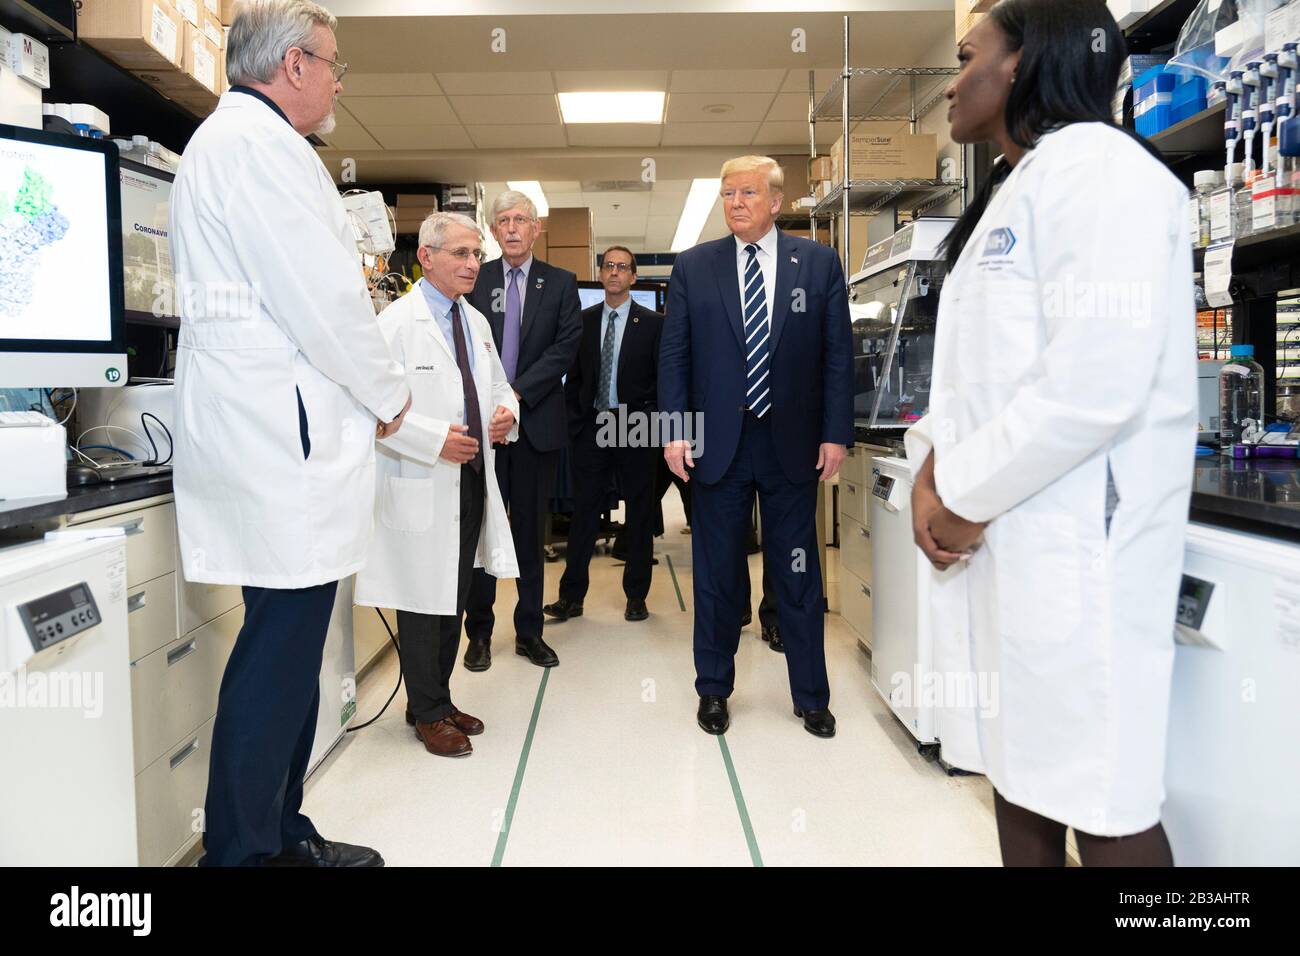 Bethesda, United States Of America. 03rd Mar, 2020. Bethesda, United States of America. 03 March, 2020. U.S President Donald Trump tours the viral pathogenesis laboratory at the National Institutes of Health March 3, 2020 in Bethesda, Maryland. Credit: Shealah Craighead/White House Photo/Alamy Live News Stock Photo